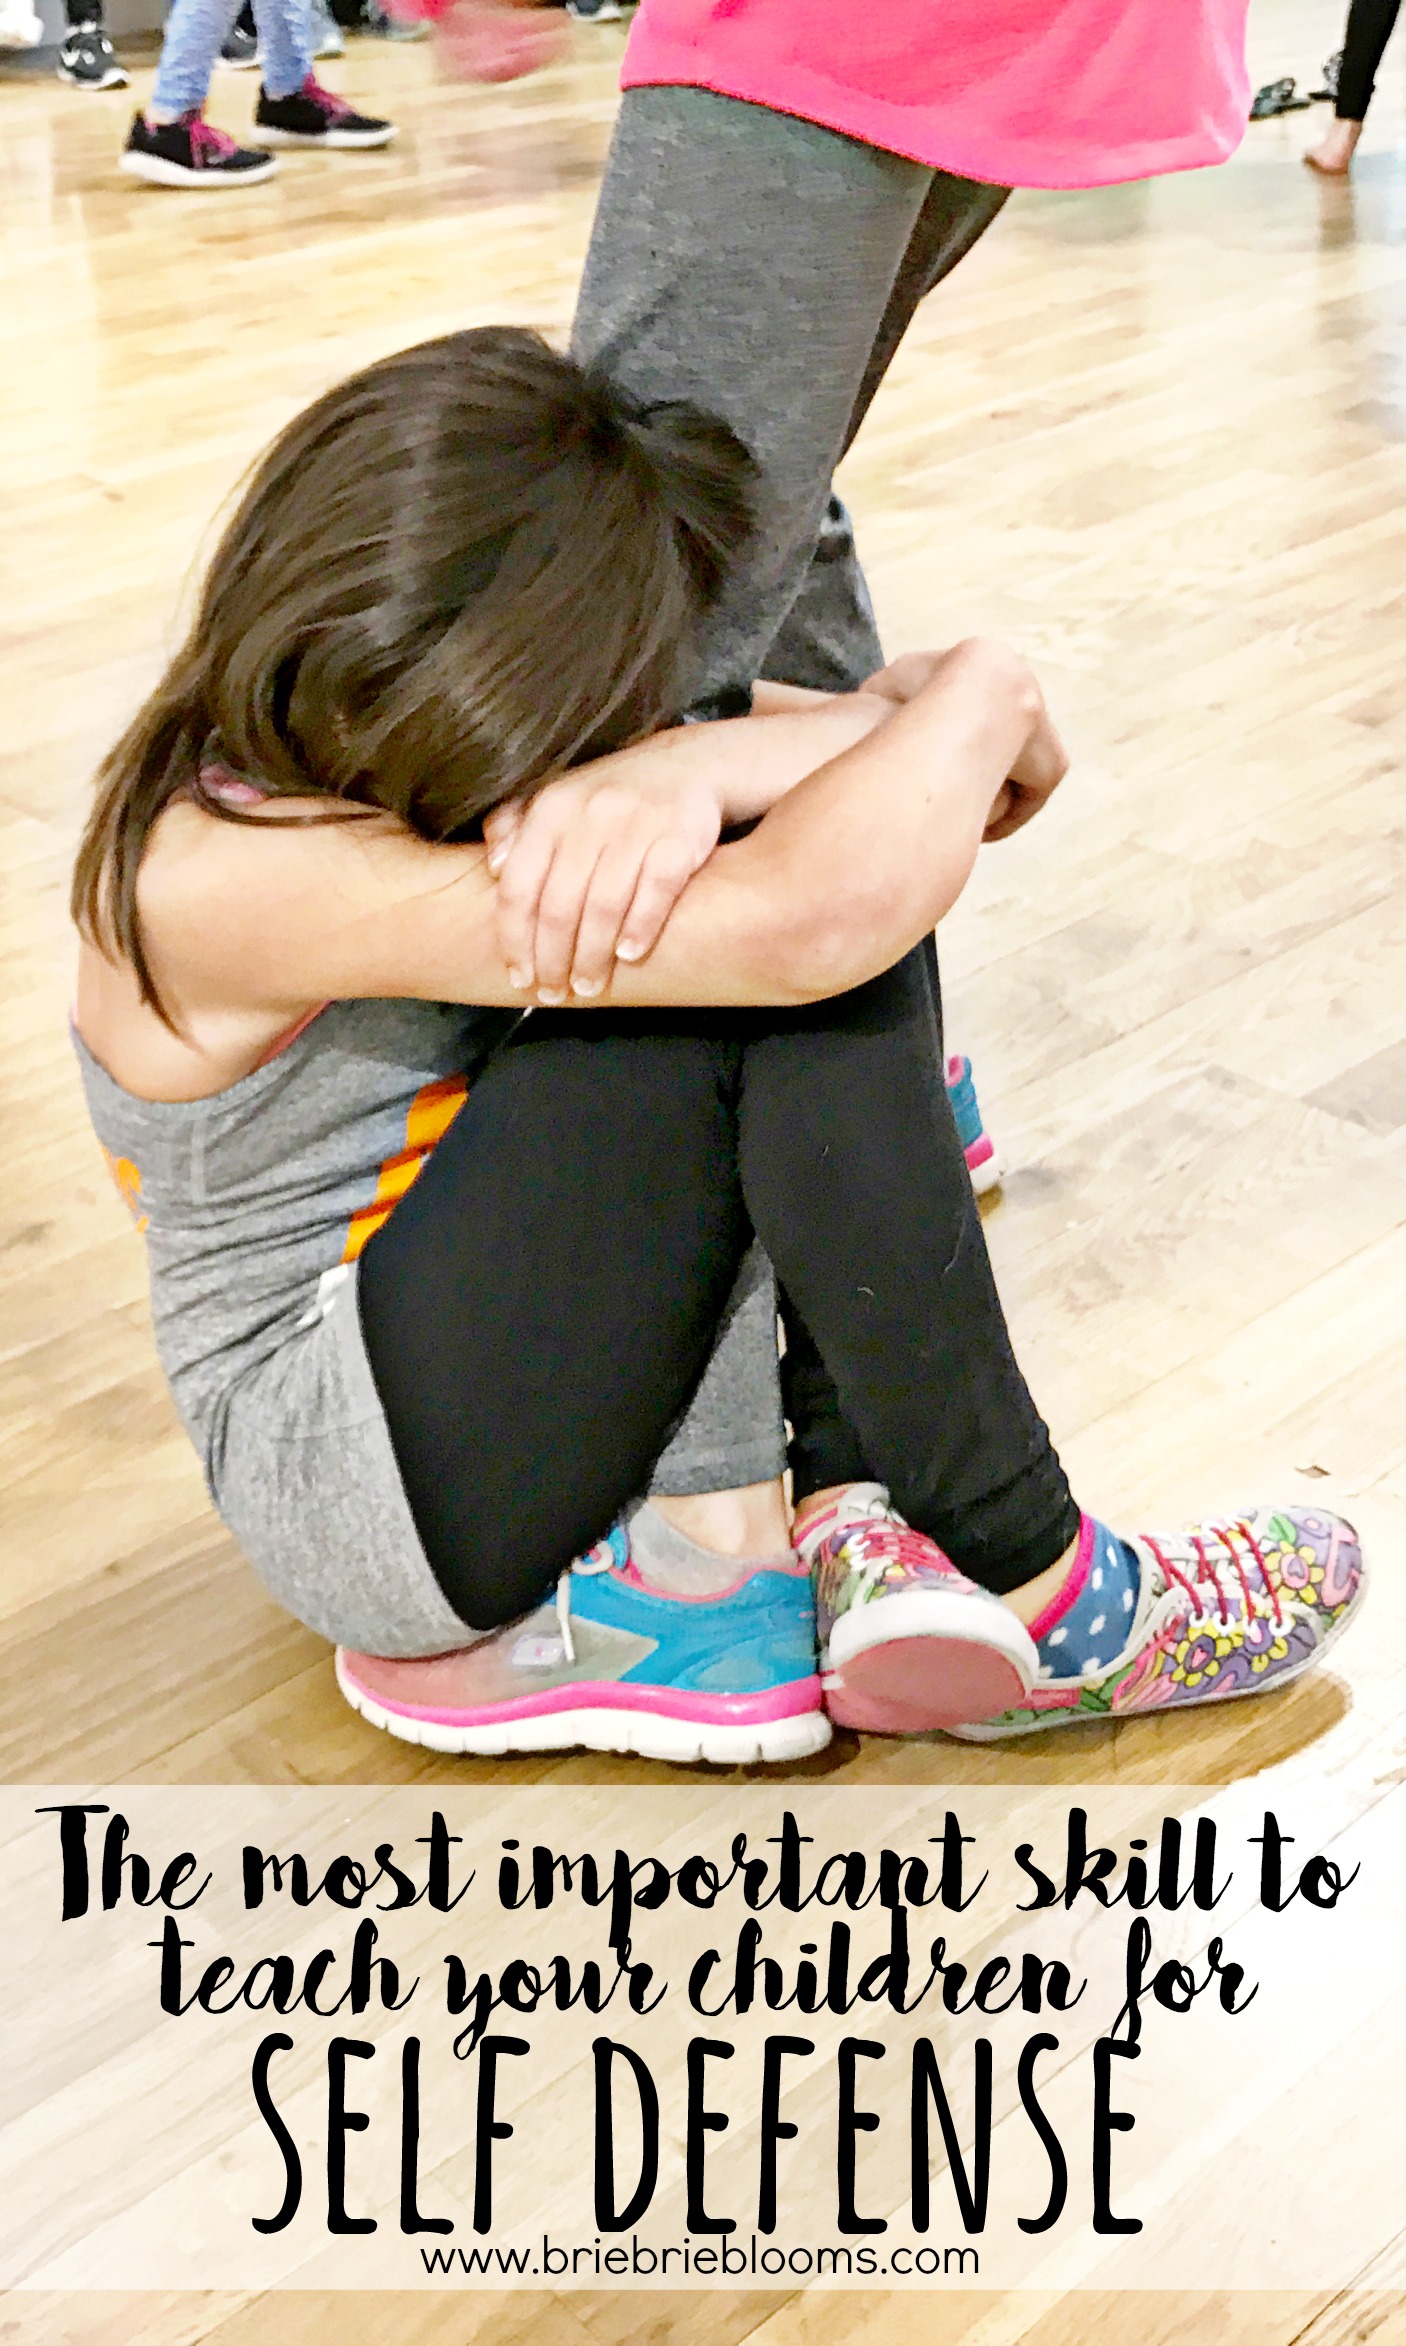 the most important skill to teach your children for self defense